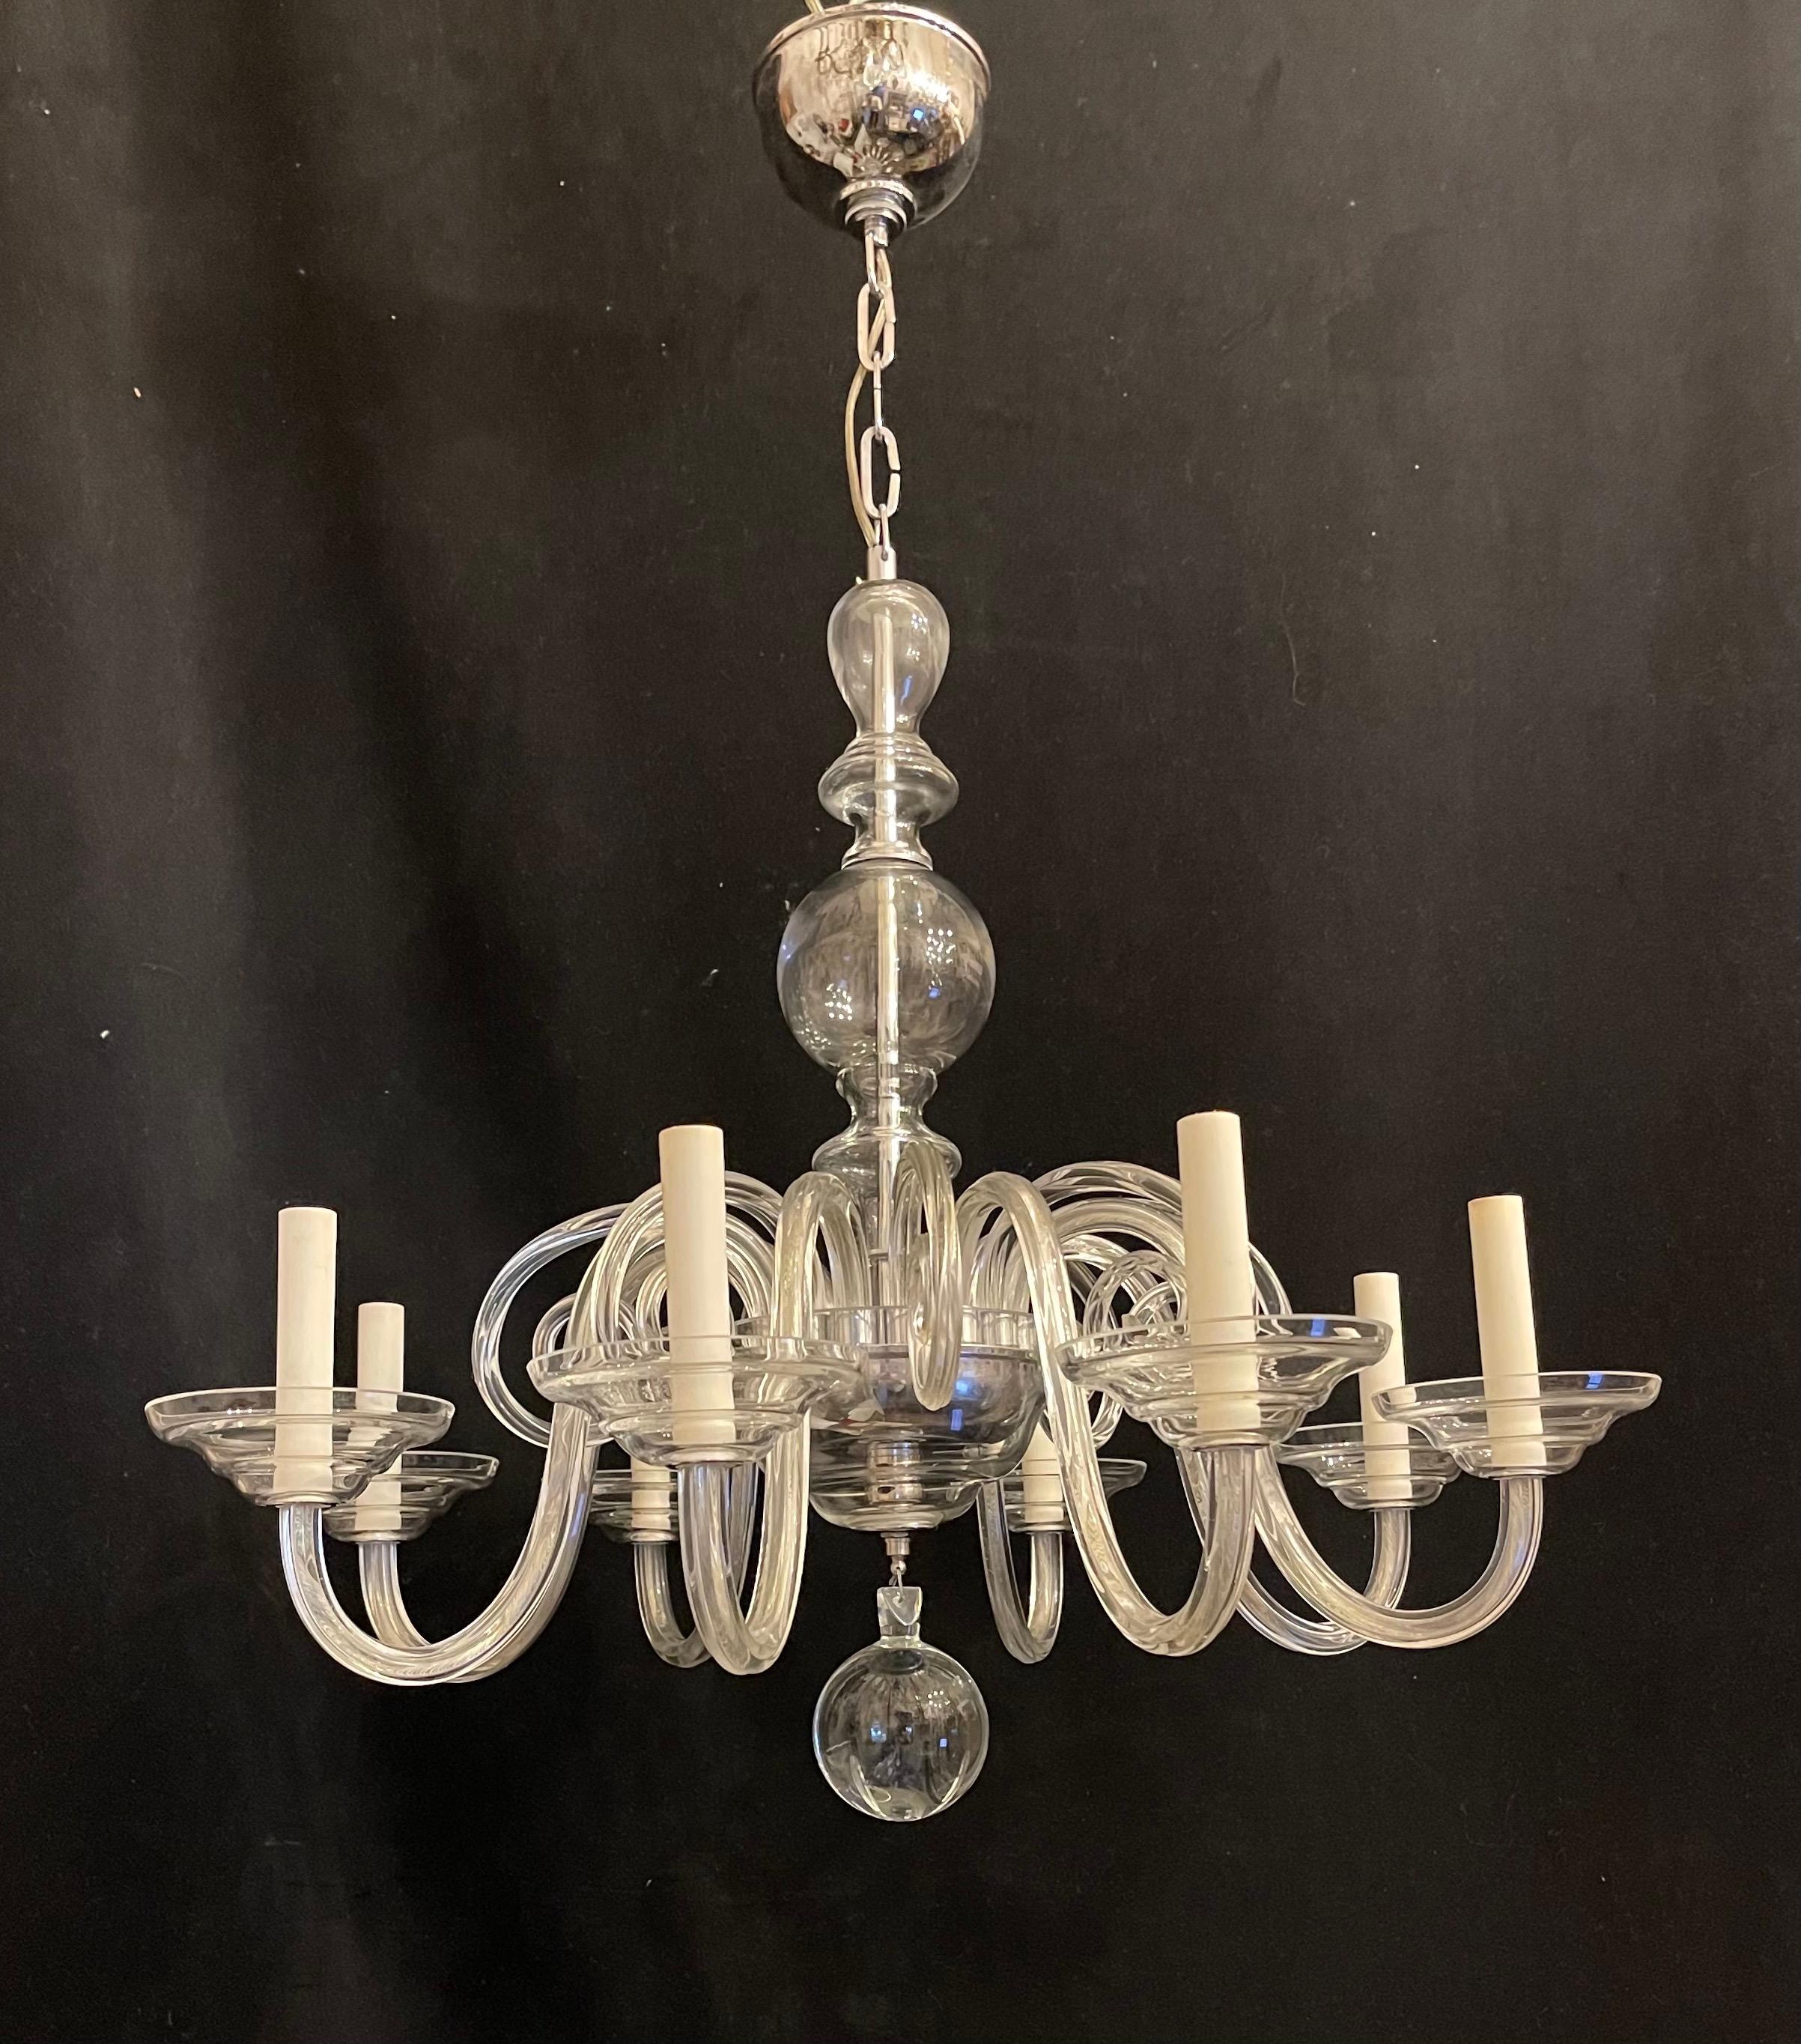 A Wonderful Mid-Century Modern crystal / glass & polished nickel 8 candelabras light fixture stream lined chandelier.
Rewired and comes with chain canopy and mounting hardware for installation.